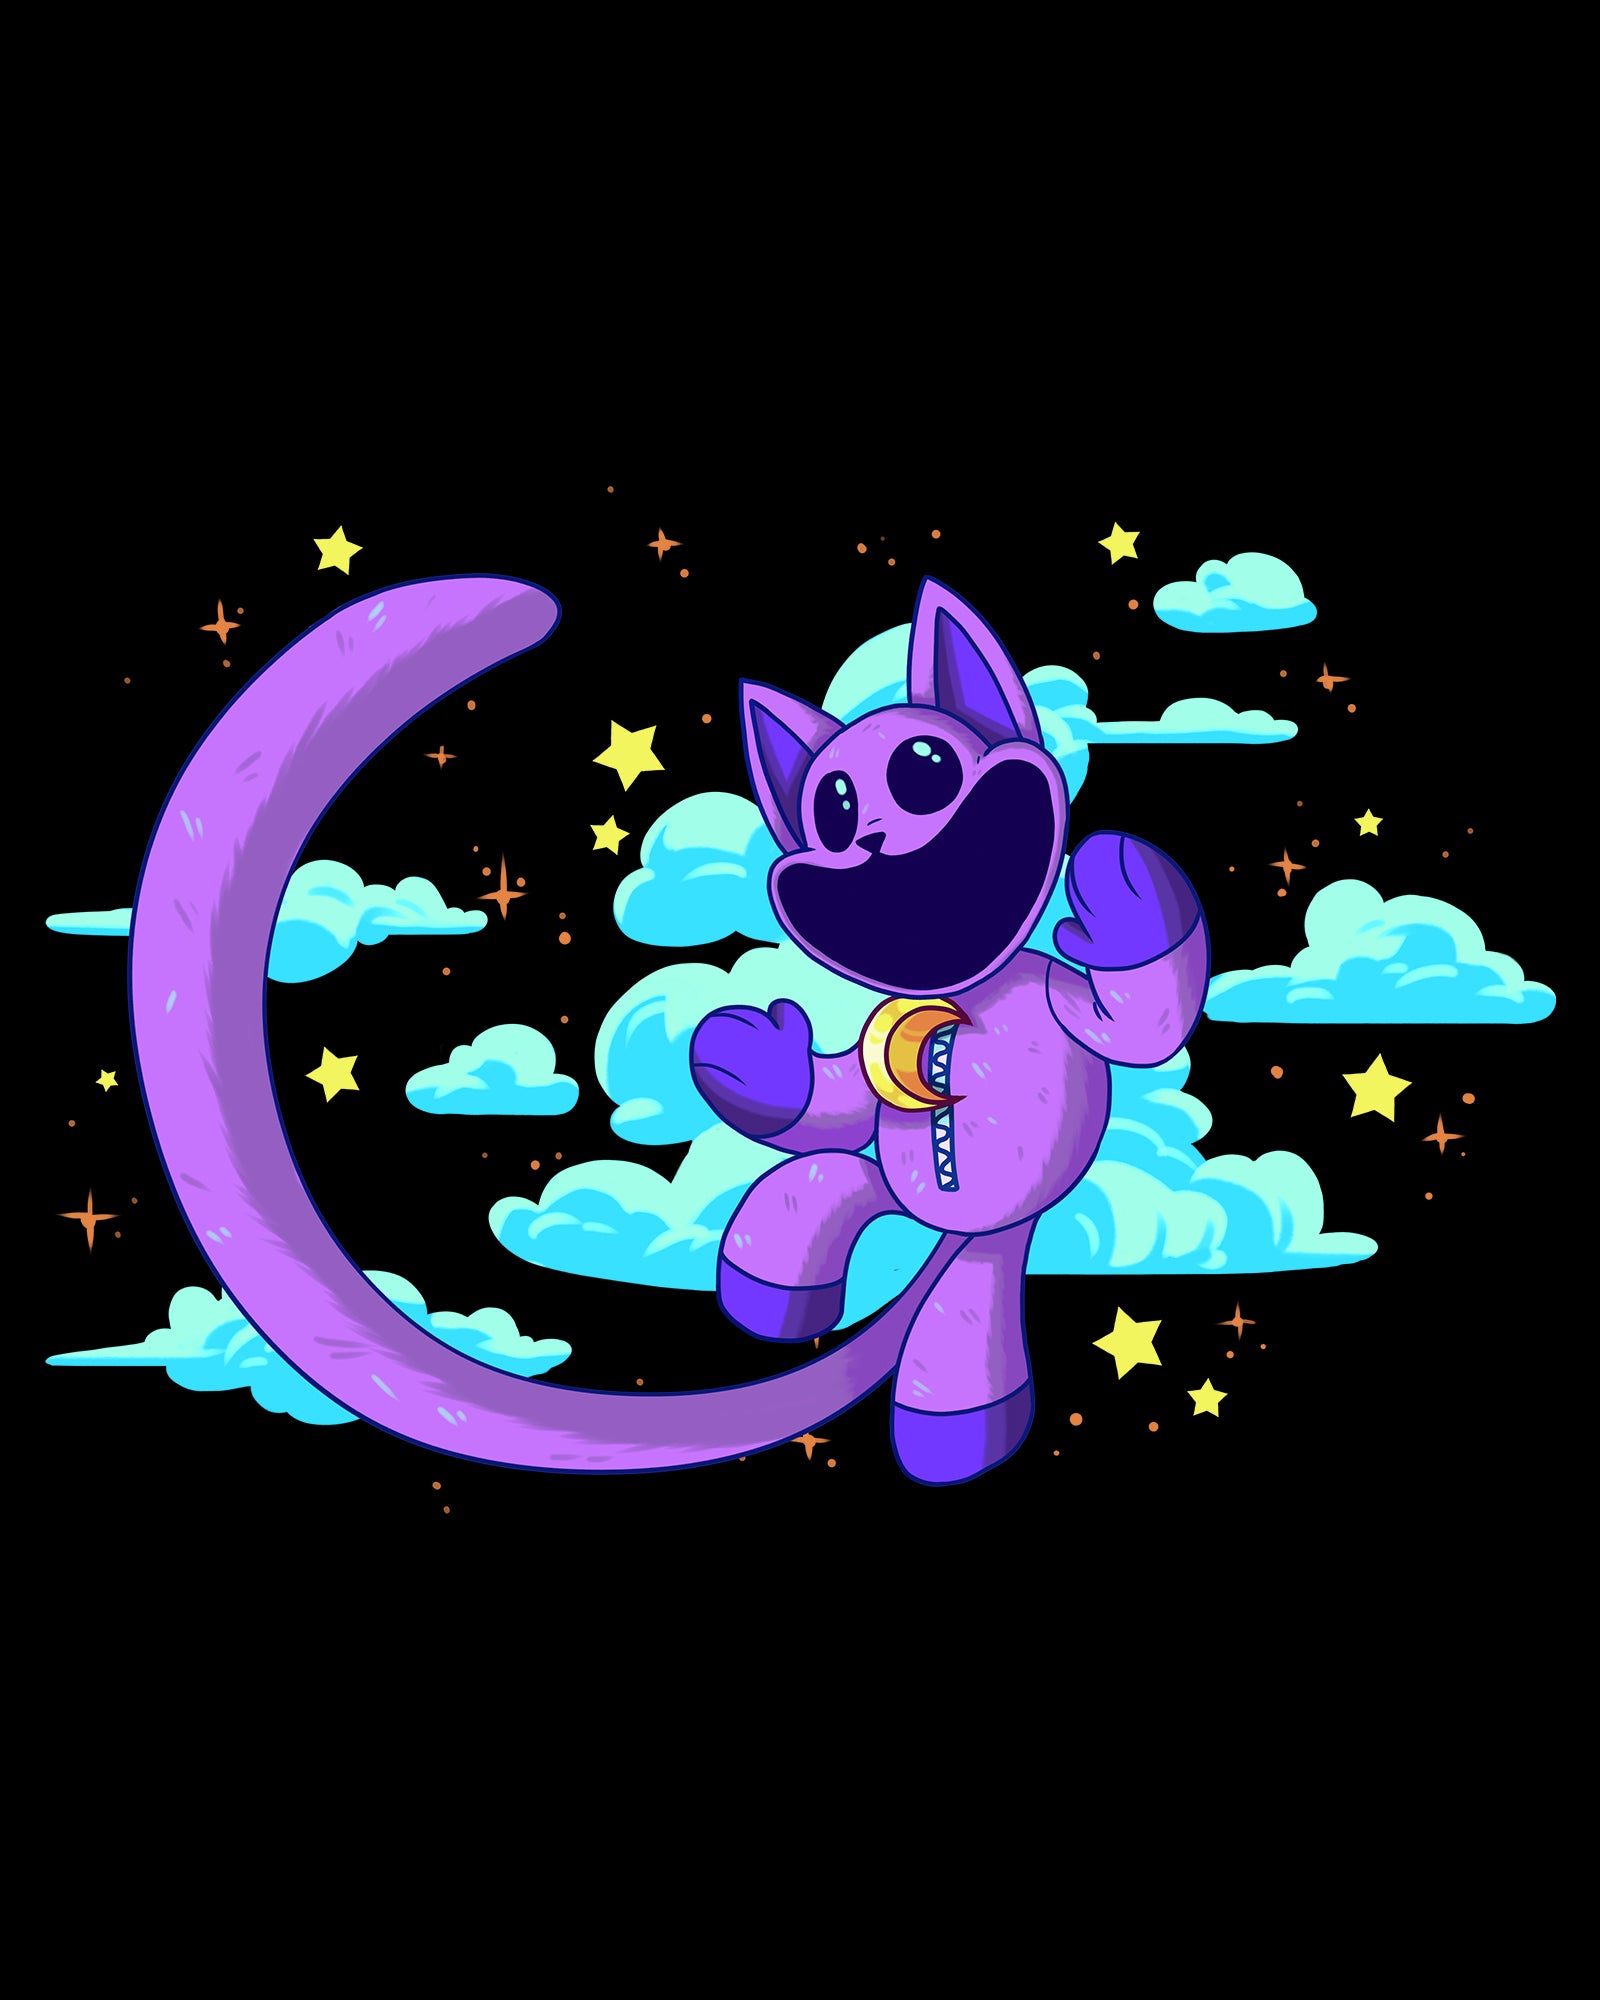 image on shirt: catnap plush in nighttime sky. clouds and stars behind him.